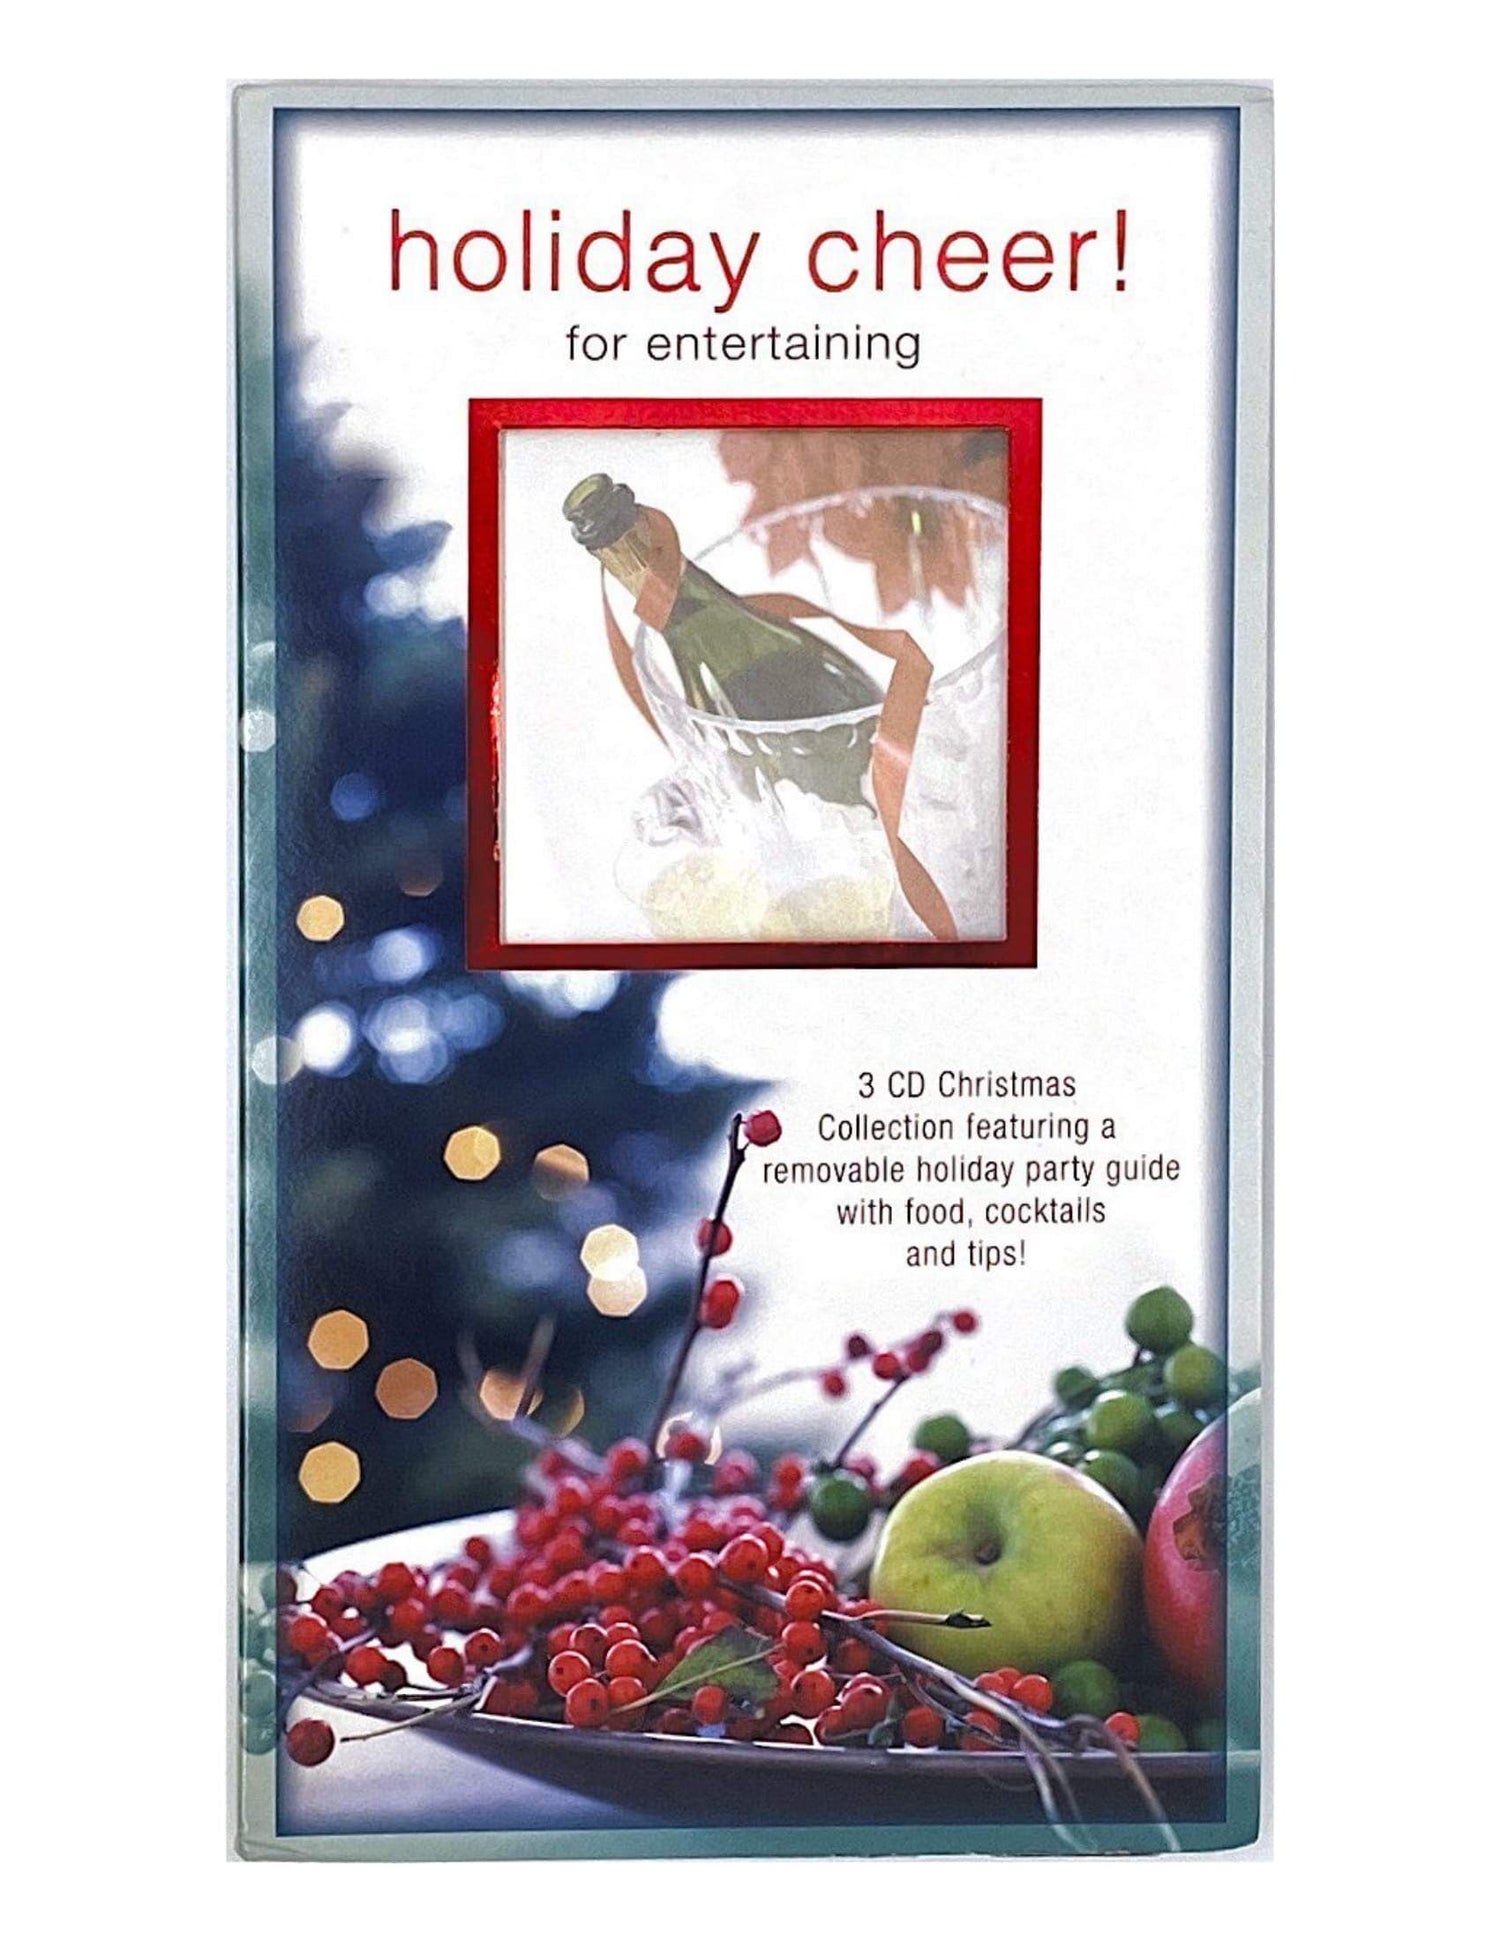 HOLIDAY PARTY GUIDE HOLIDAY CHEER! FOR ENTERTAINING- 3 COMPACT DISC